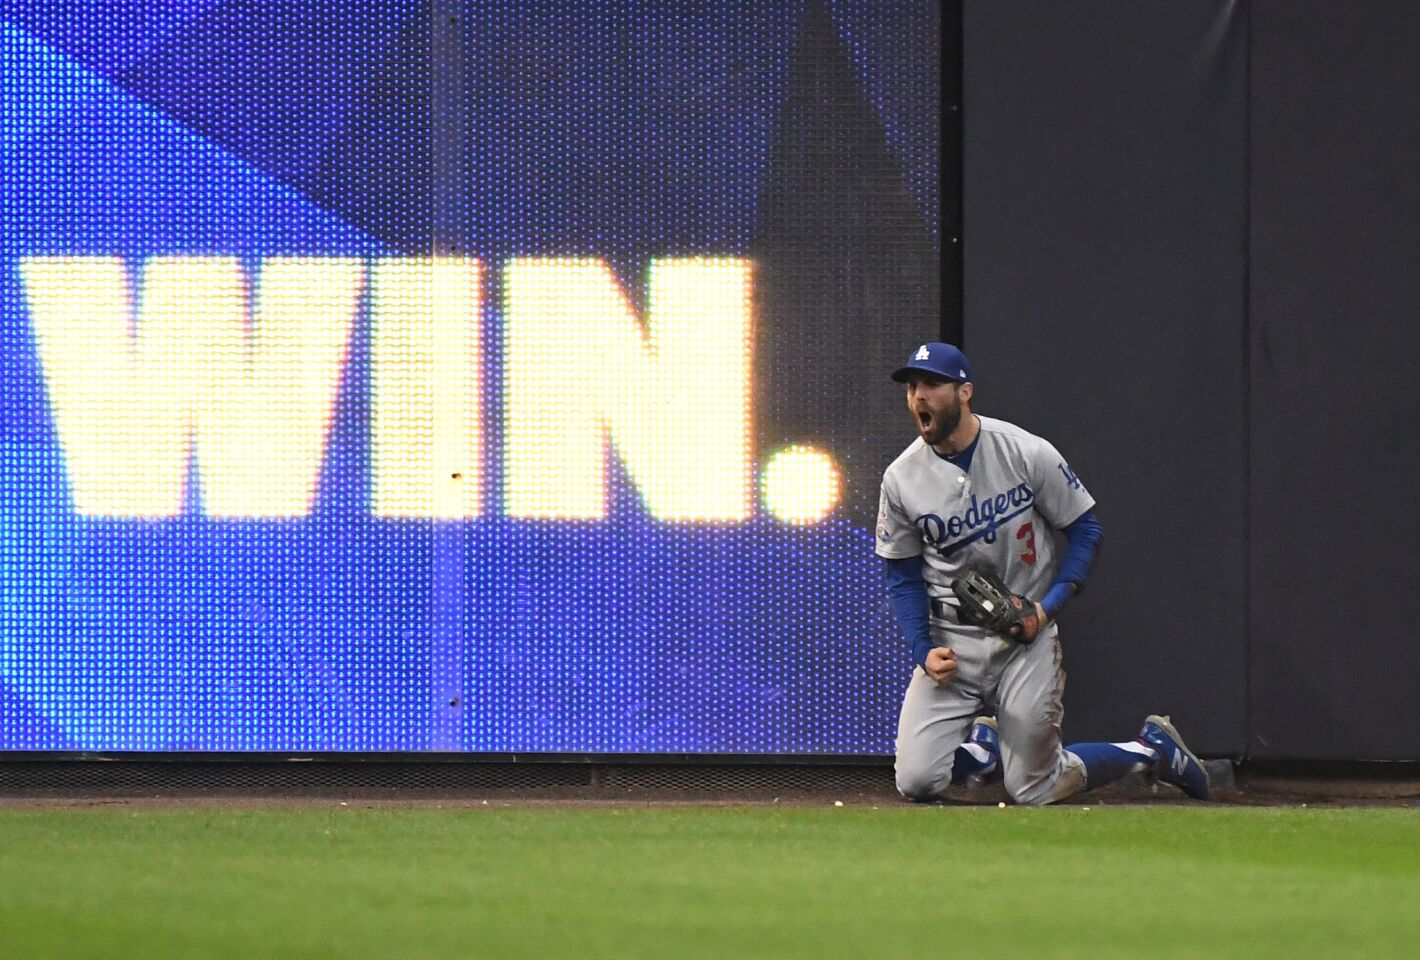 Dodgers left fielder Chris Taylor celebrates after catching a drive by Brewers Christian Yelich in the 5th inning.